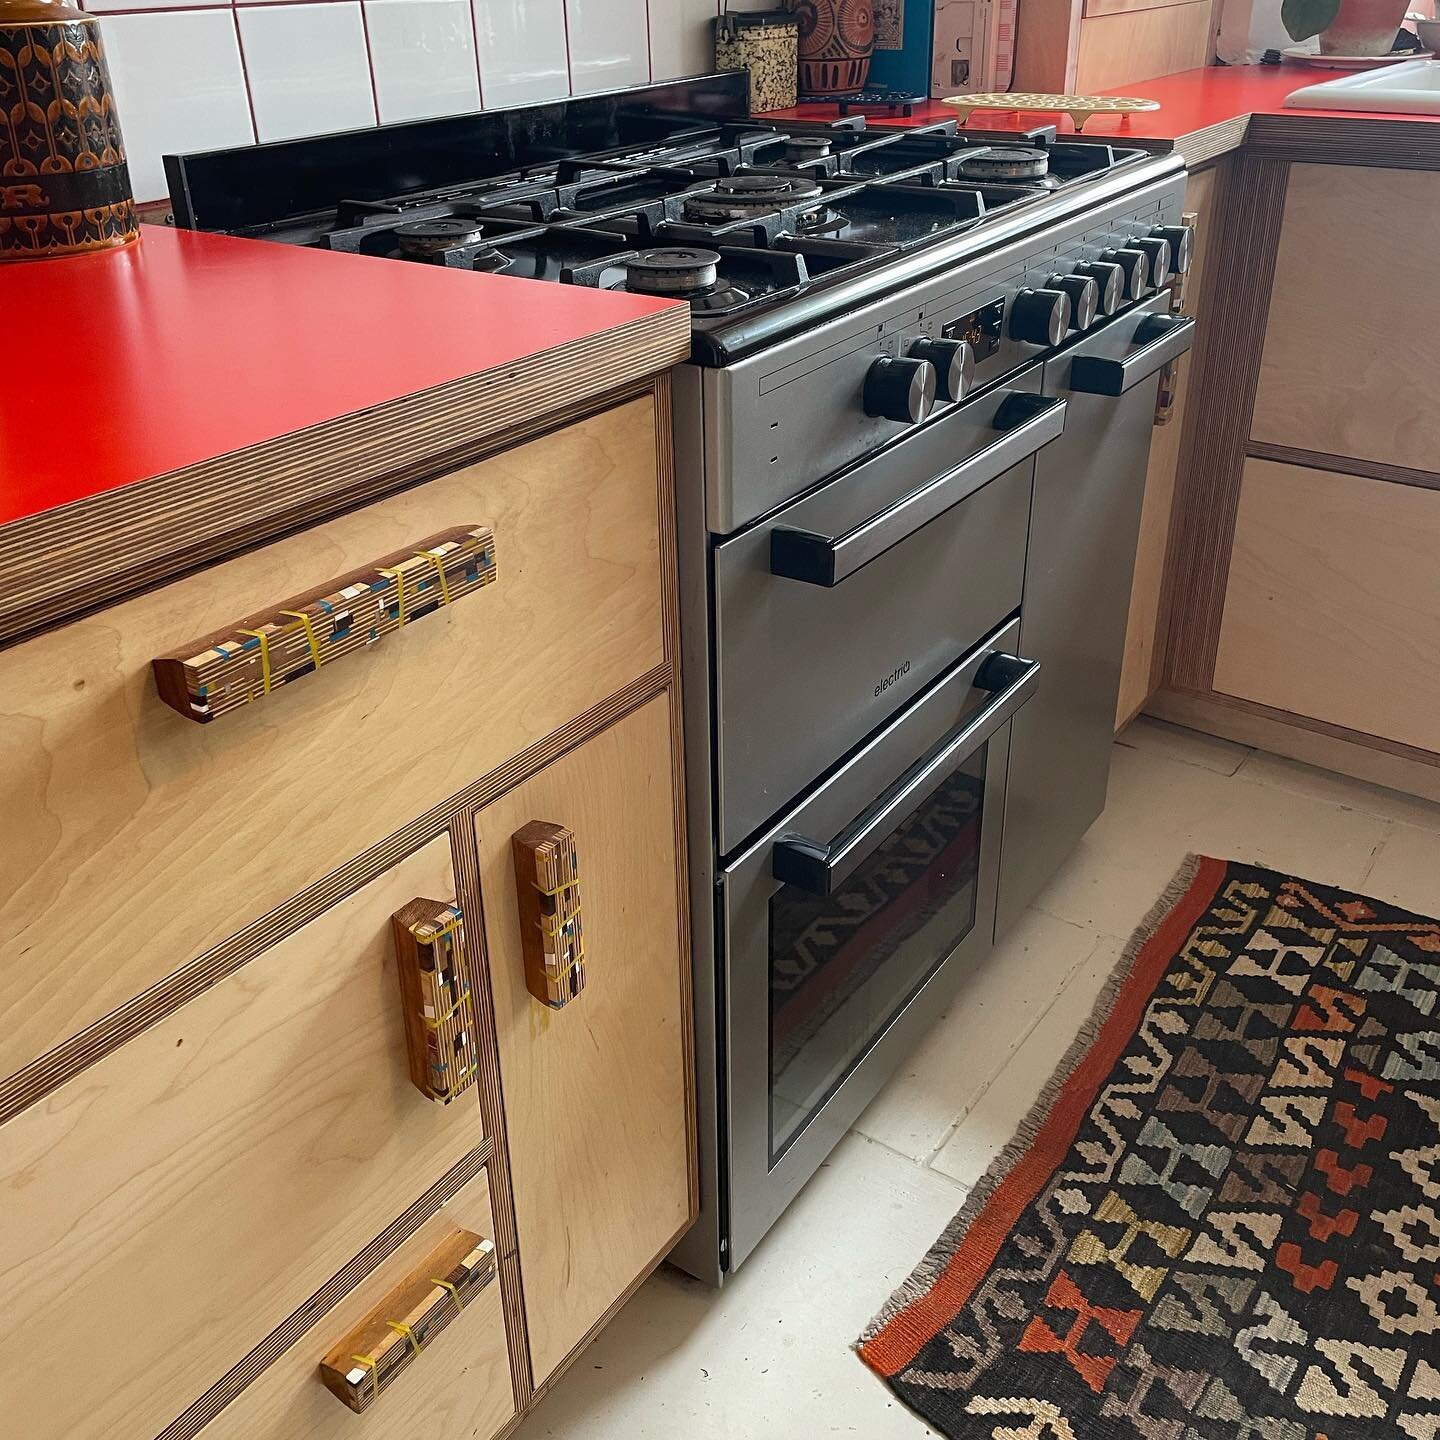 A sneaky peak into a kitchen we did about a year ago. It&rsquo;s taken us this long to get some snaps! A full post to follow, but check out those custom handles and bright red Formica worktop! We LOVE it. 

#formica #bespokehandles #modernmarquetry